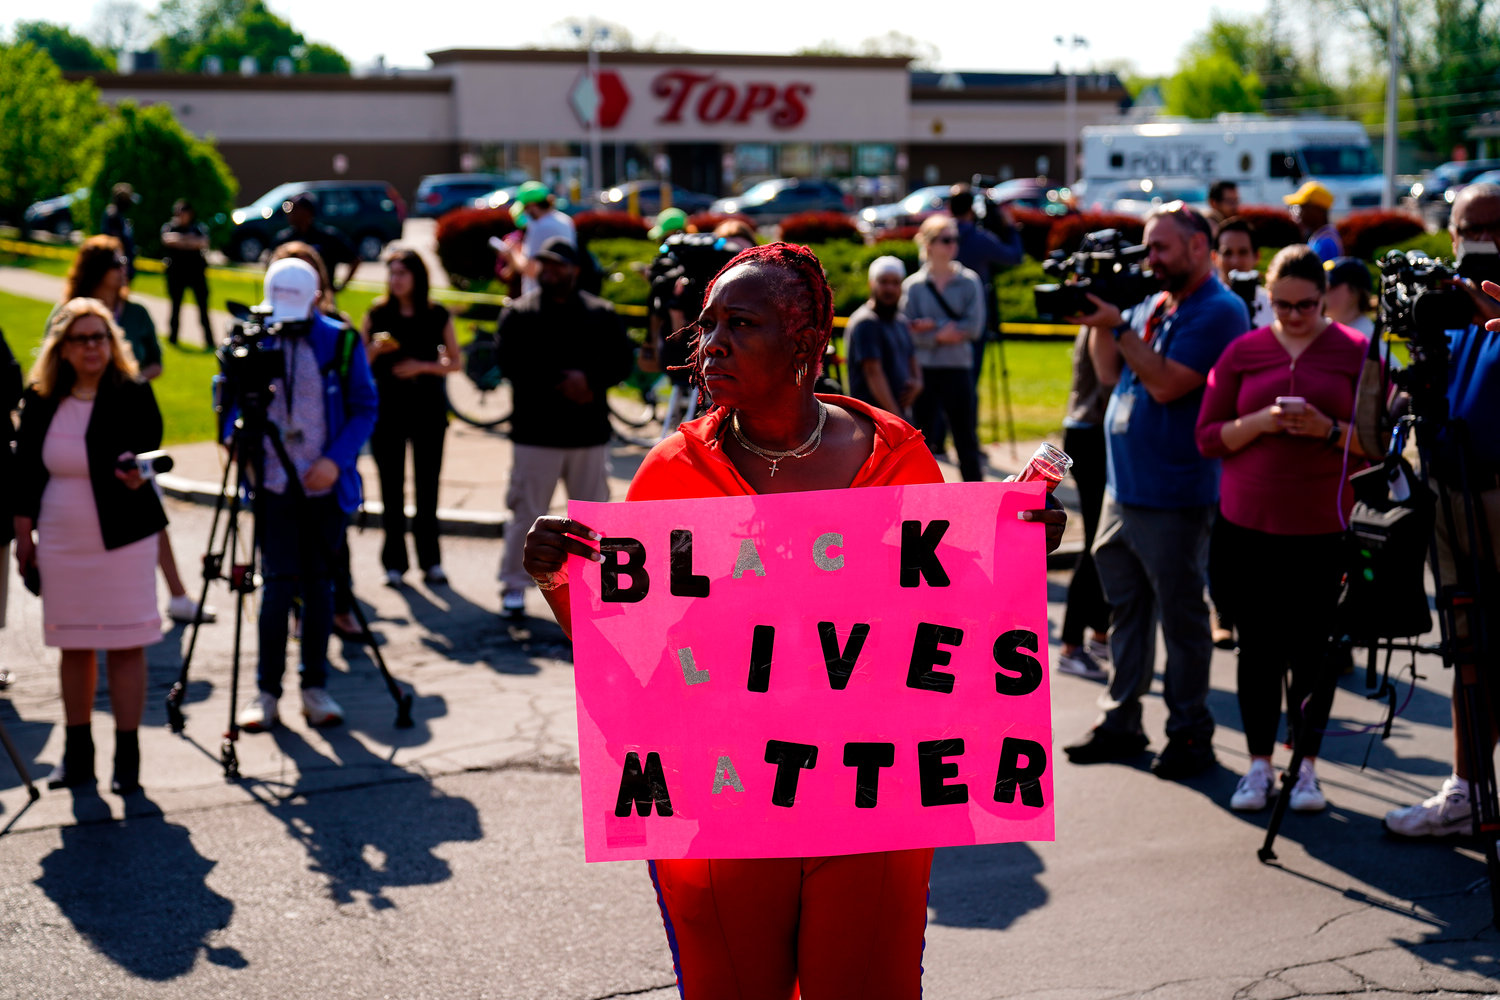 Sharon Doyle gathers with others outside the scene of a shooting at a supermarket, in Buffalo, N.Y., Sunday, May 15, 2022. (AP Photo/Matt Rourke)